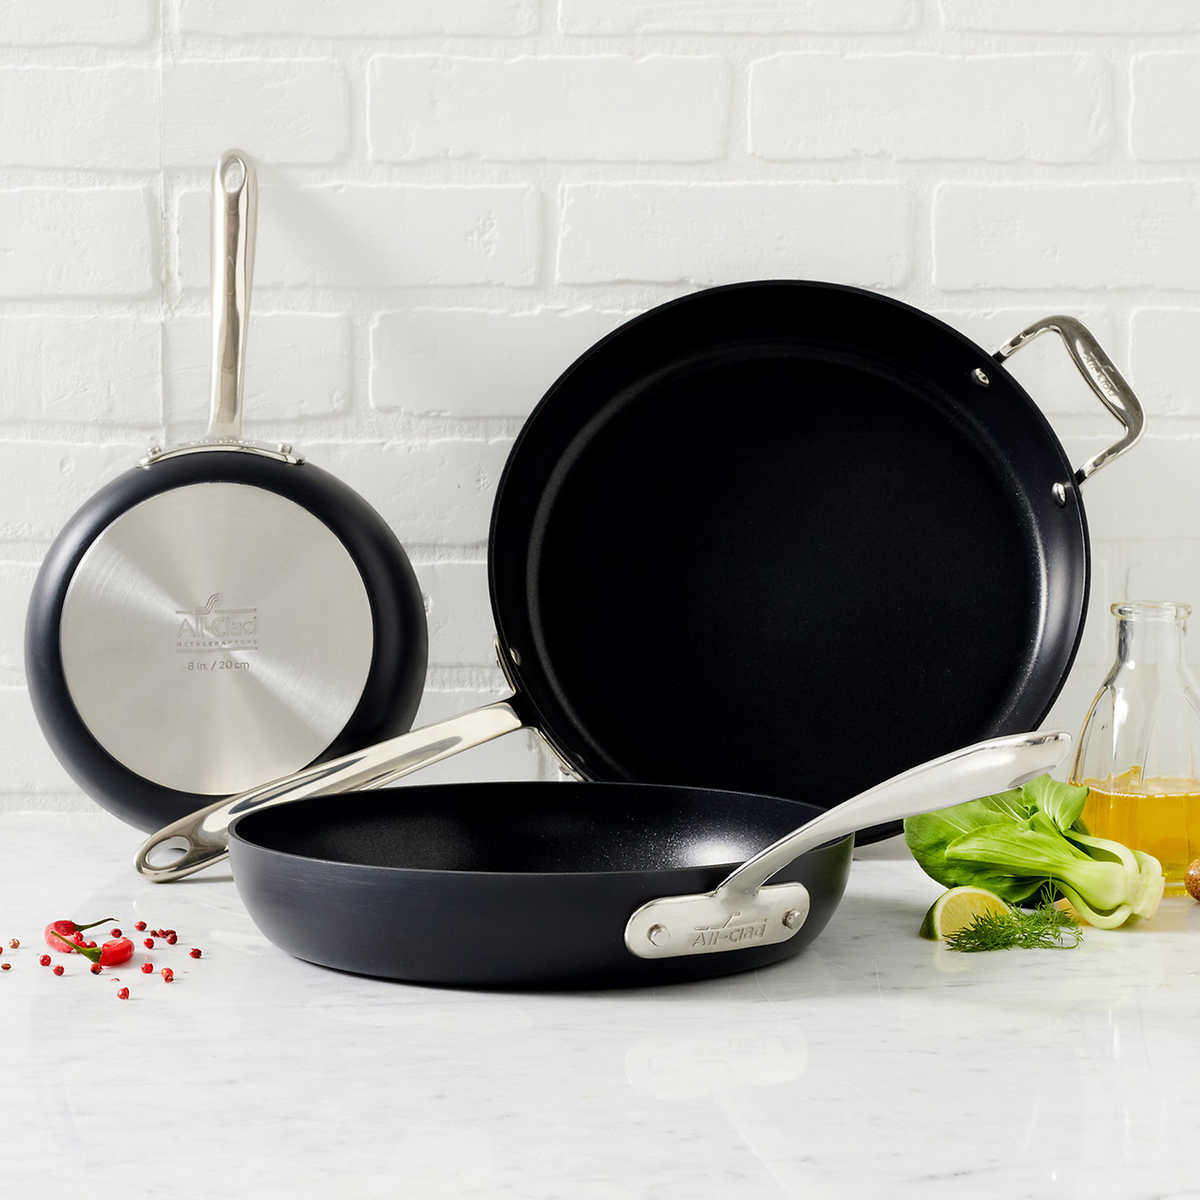 All-Clad Hard-Anodized Fry Pan, 3 Piece Set